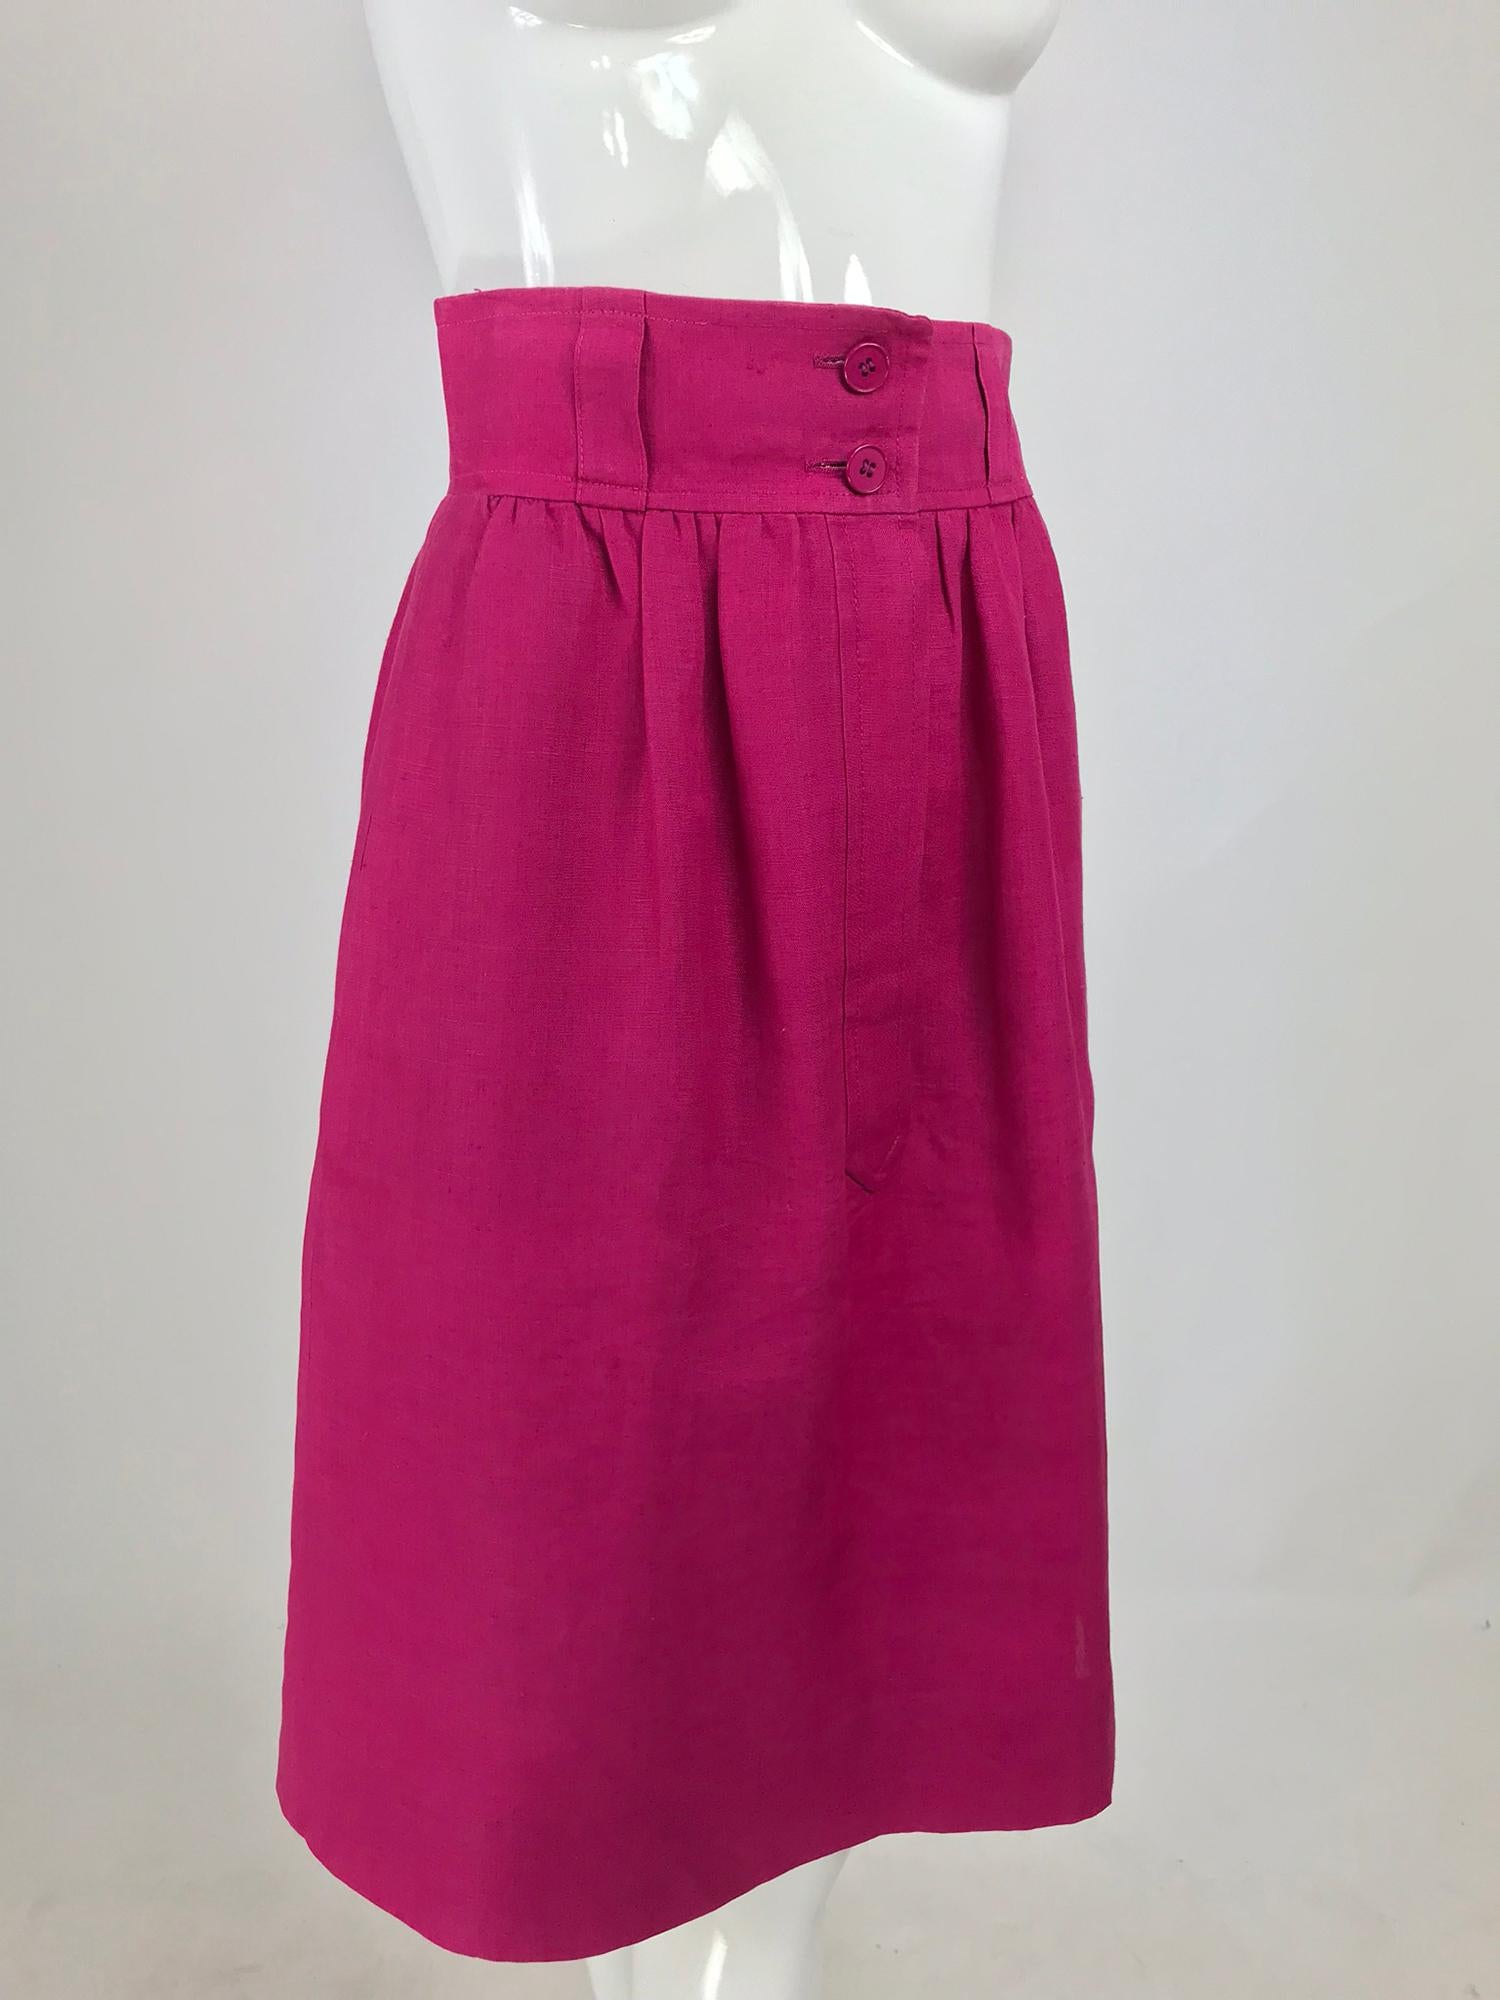 Givenchy Hot Pink Linen Skirt from the 1980s. Wide high waist skirt has double button closure at the front and narrow belt loops around at the waist band center. There is a placket at the center front with a hidden buttons below. On seam side